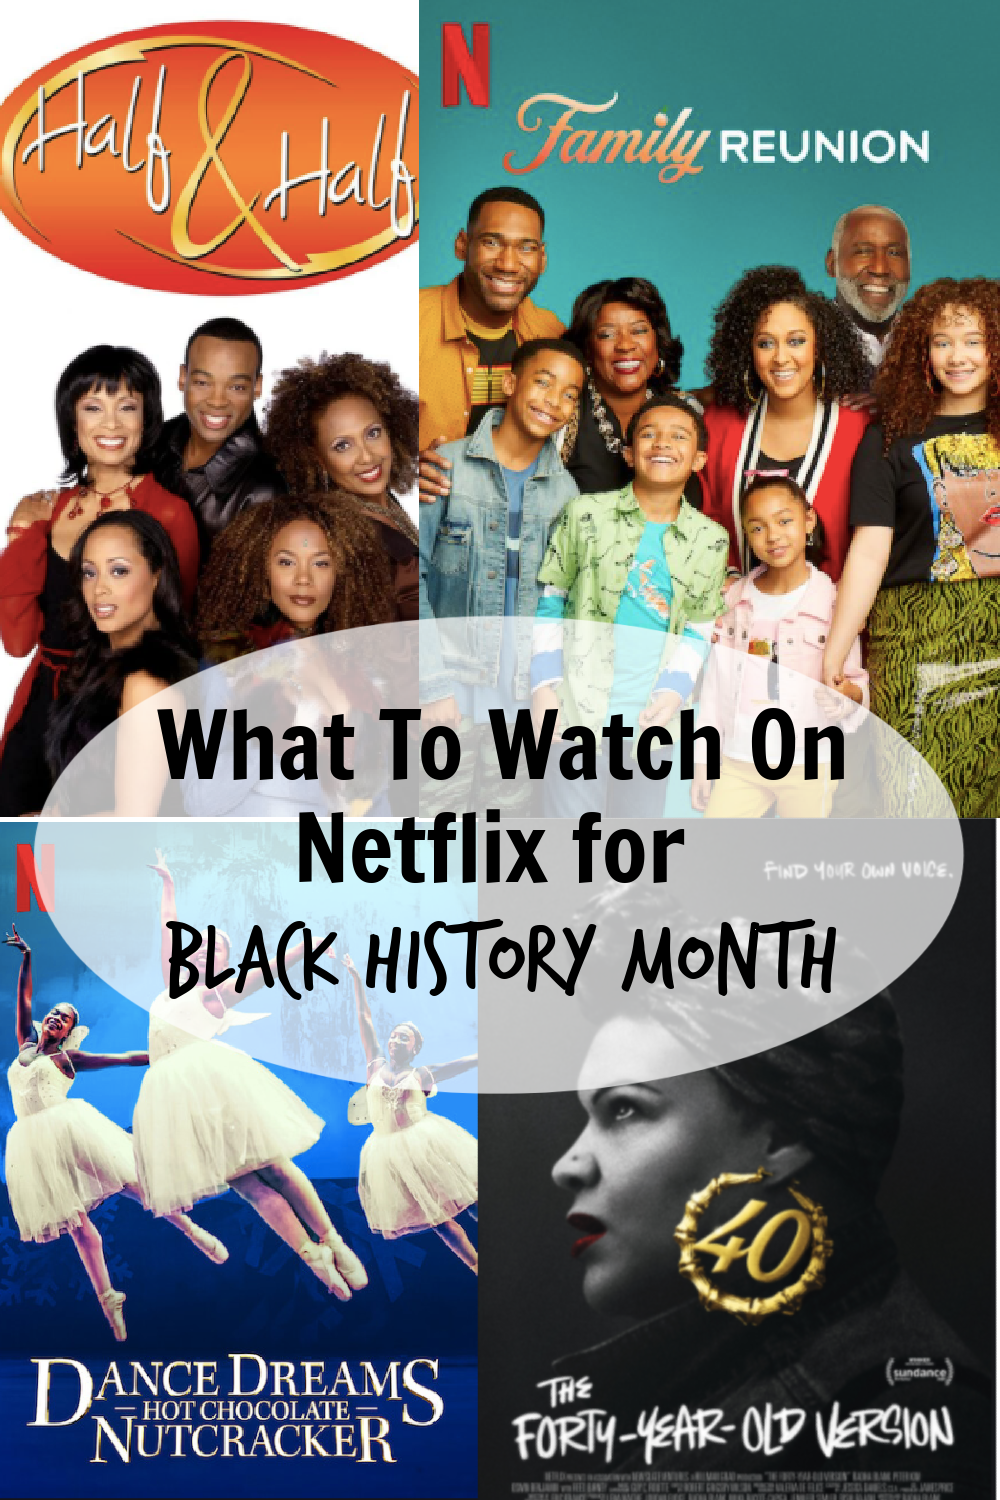 What To Watch on Netflix for Black History Month